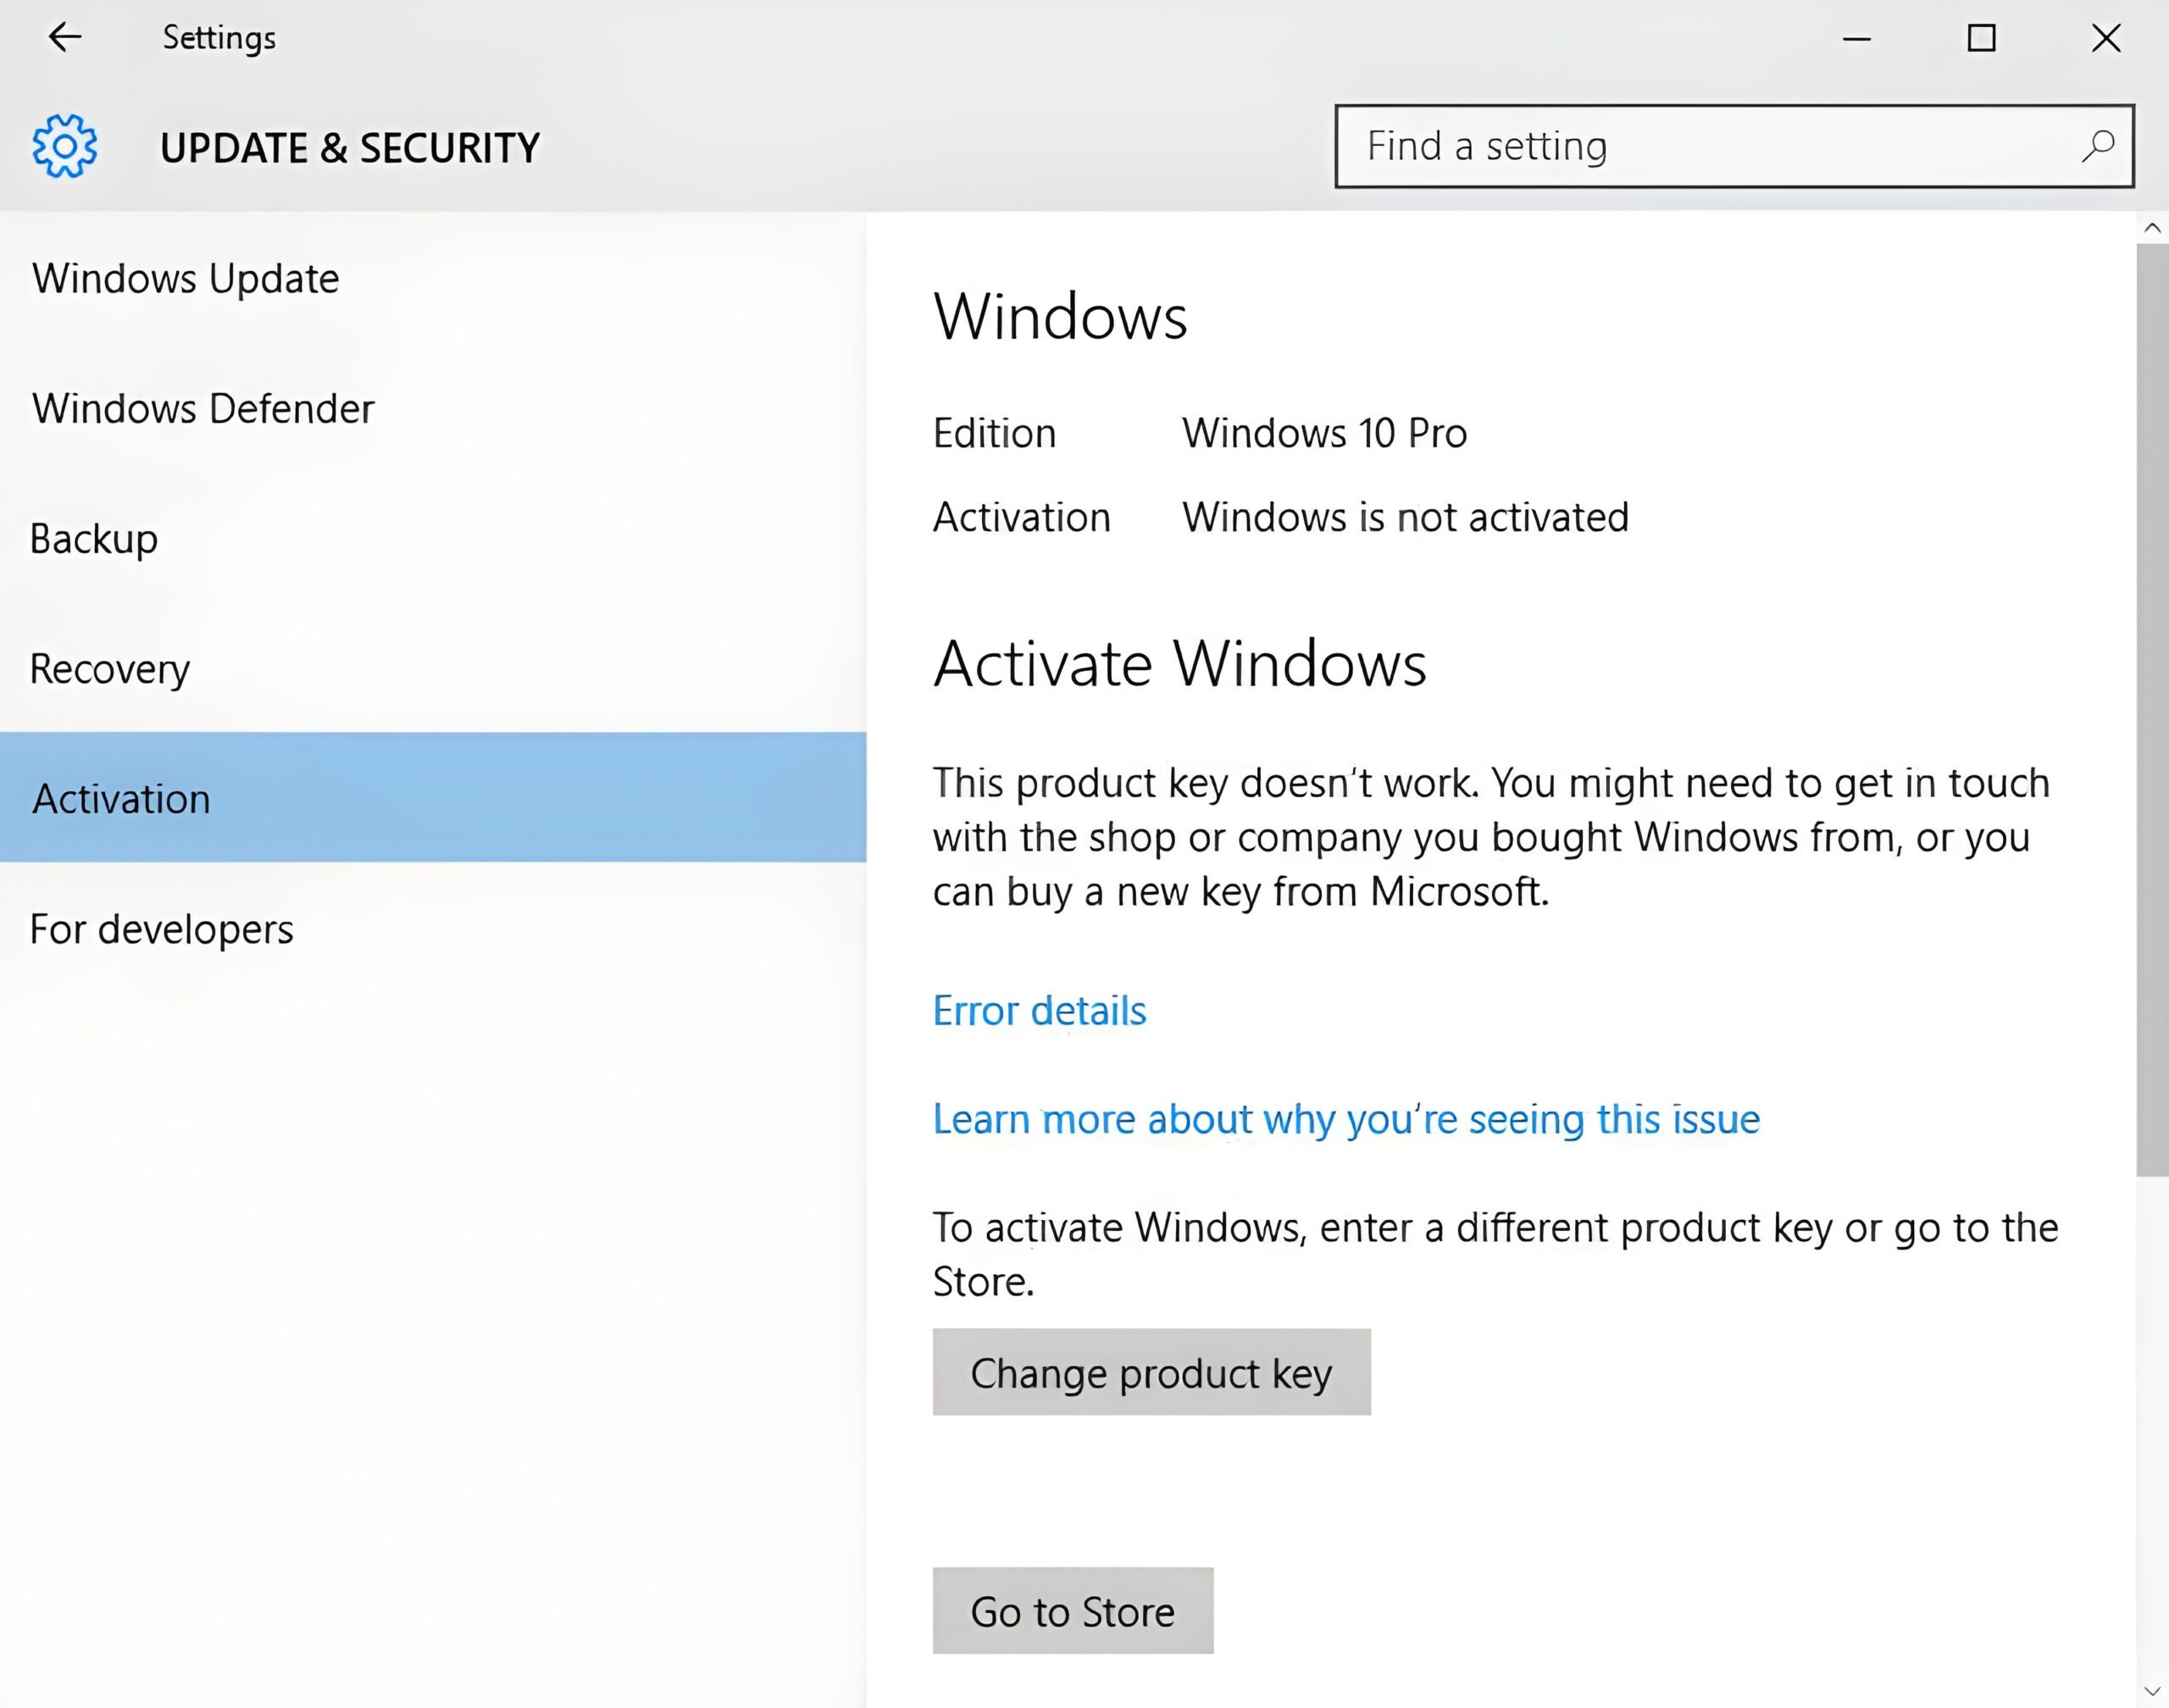 How to Switch Windows 10 Product Keys